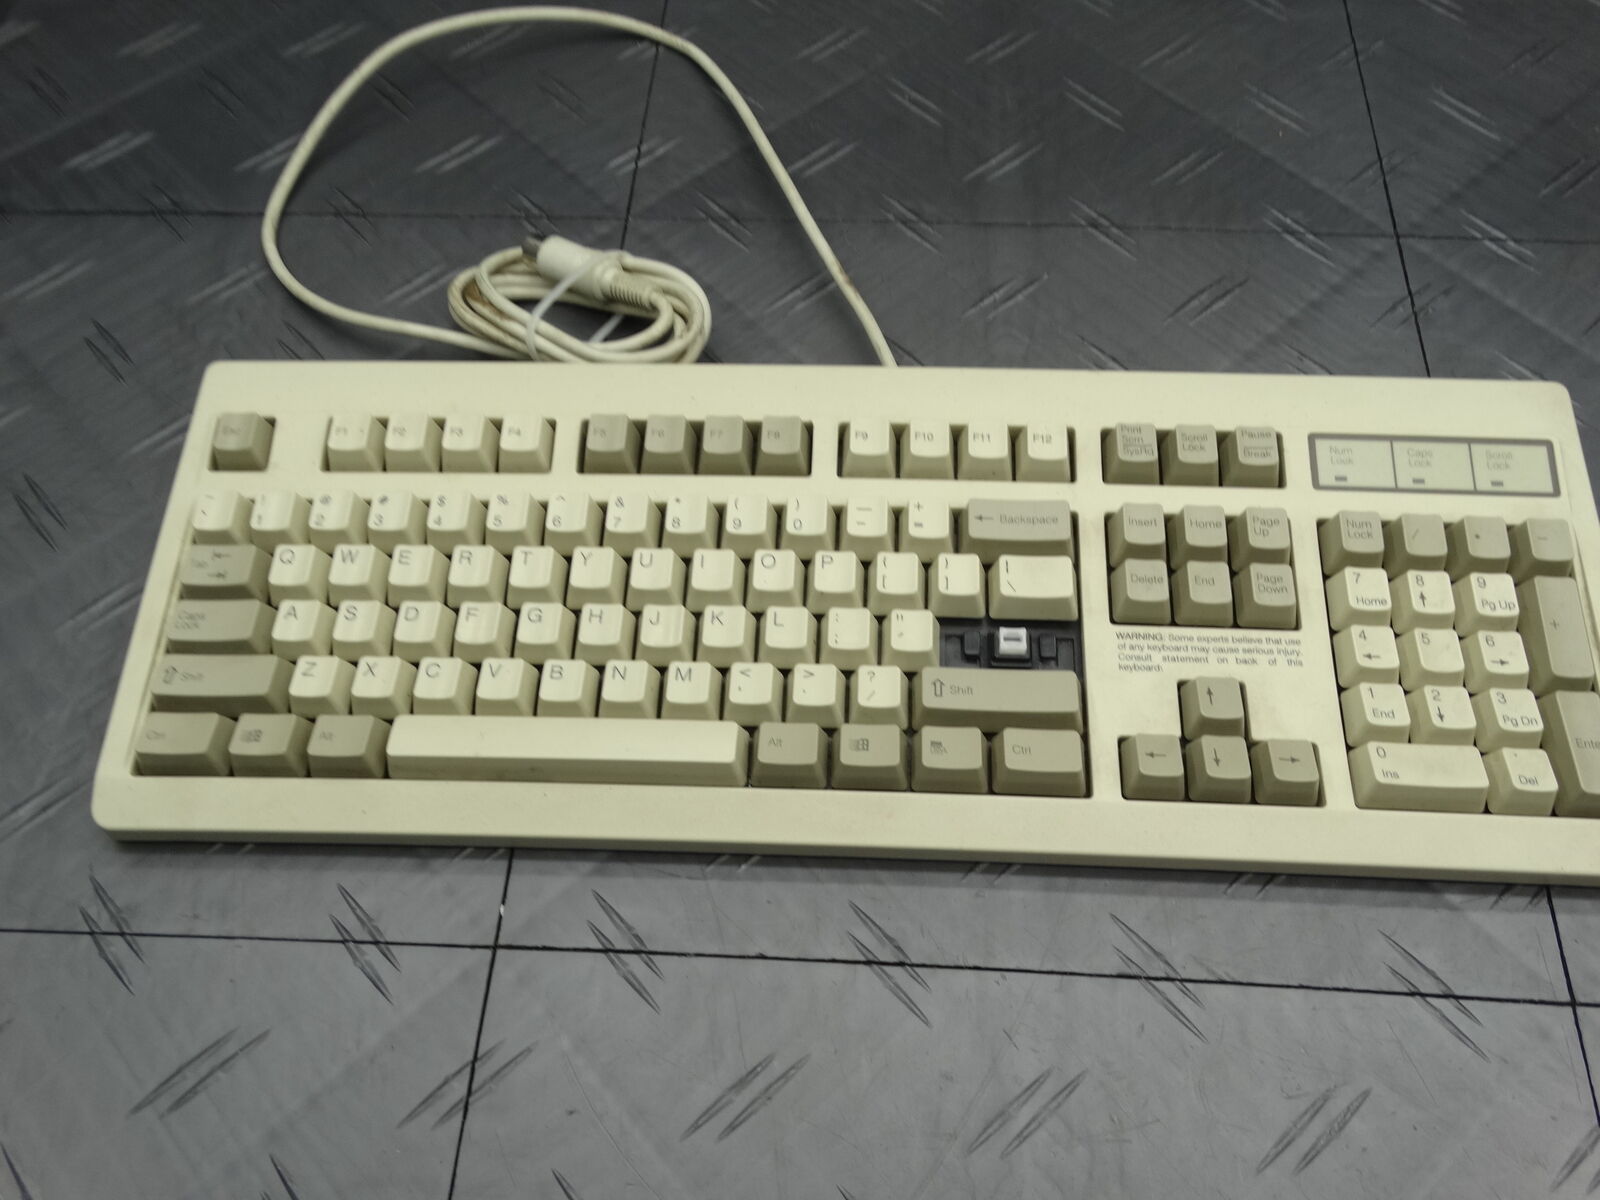 NMB Clicky Mechanical Keyboard AT/XT Connection RT6655TW Mainframe (Missing Key)